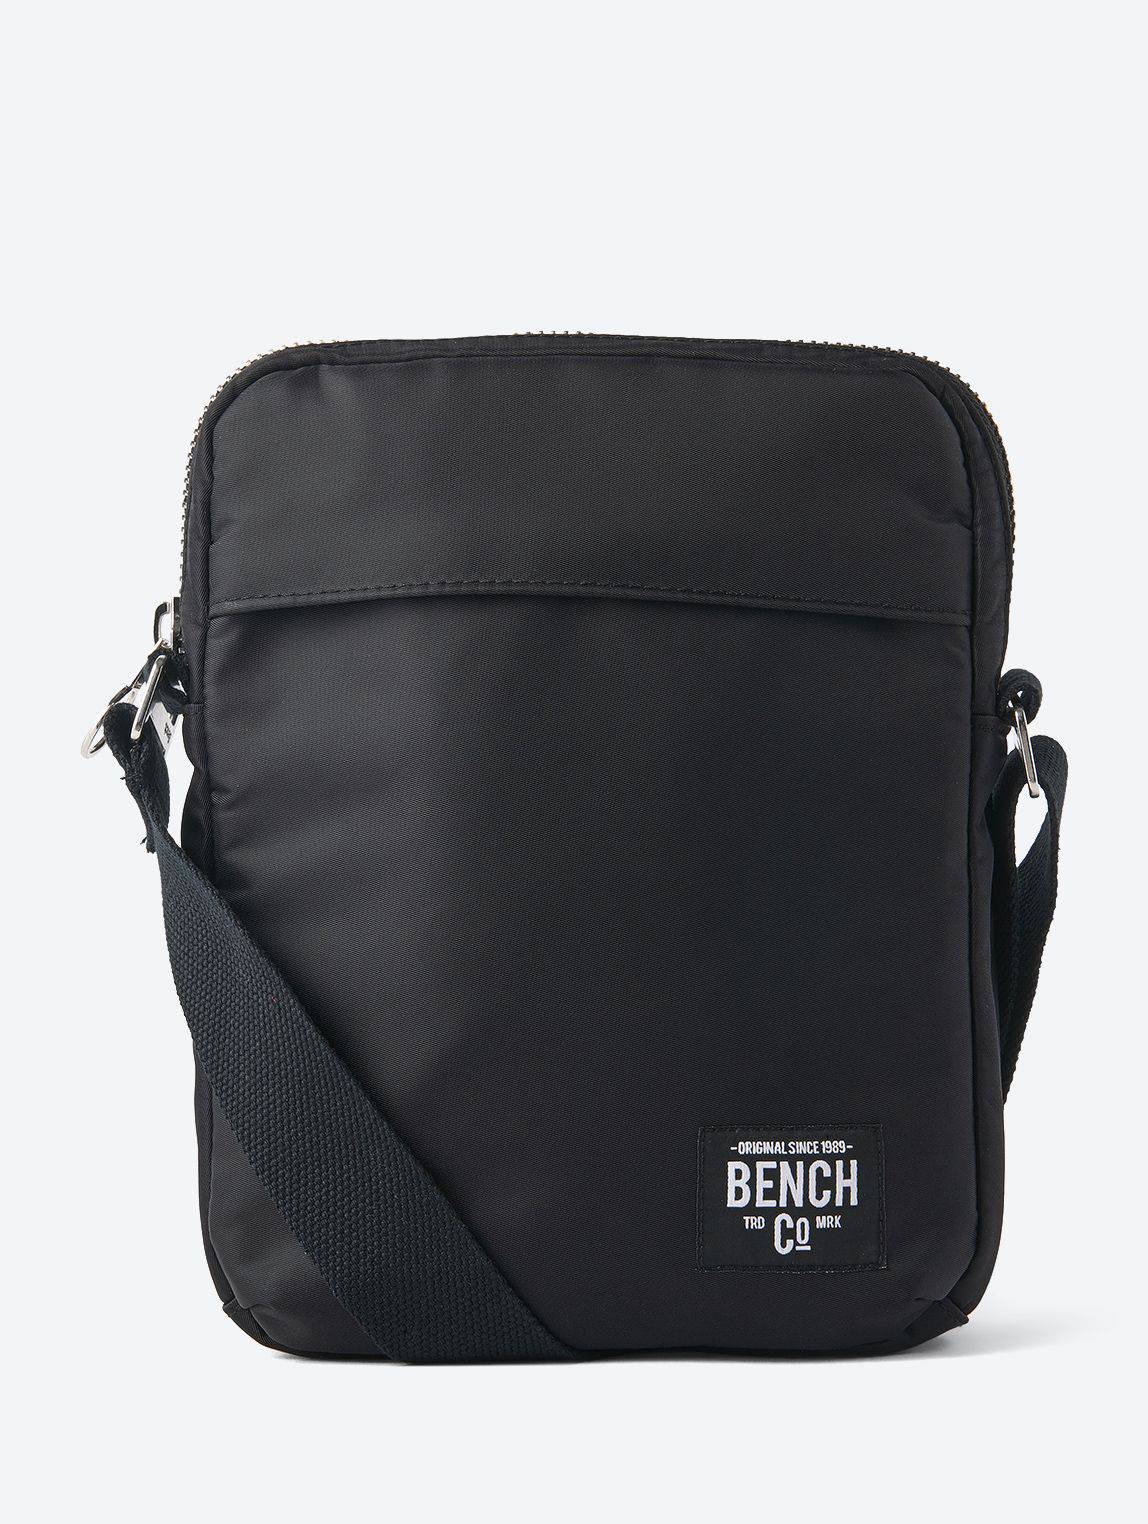 Bench Canada: Extra 40% off Sale Items, Free Shipping and Free Bag with ...